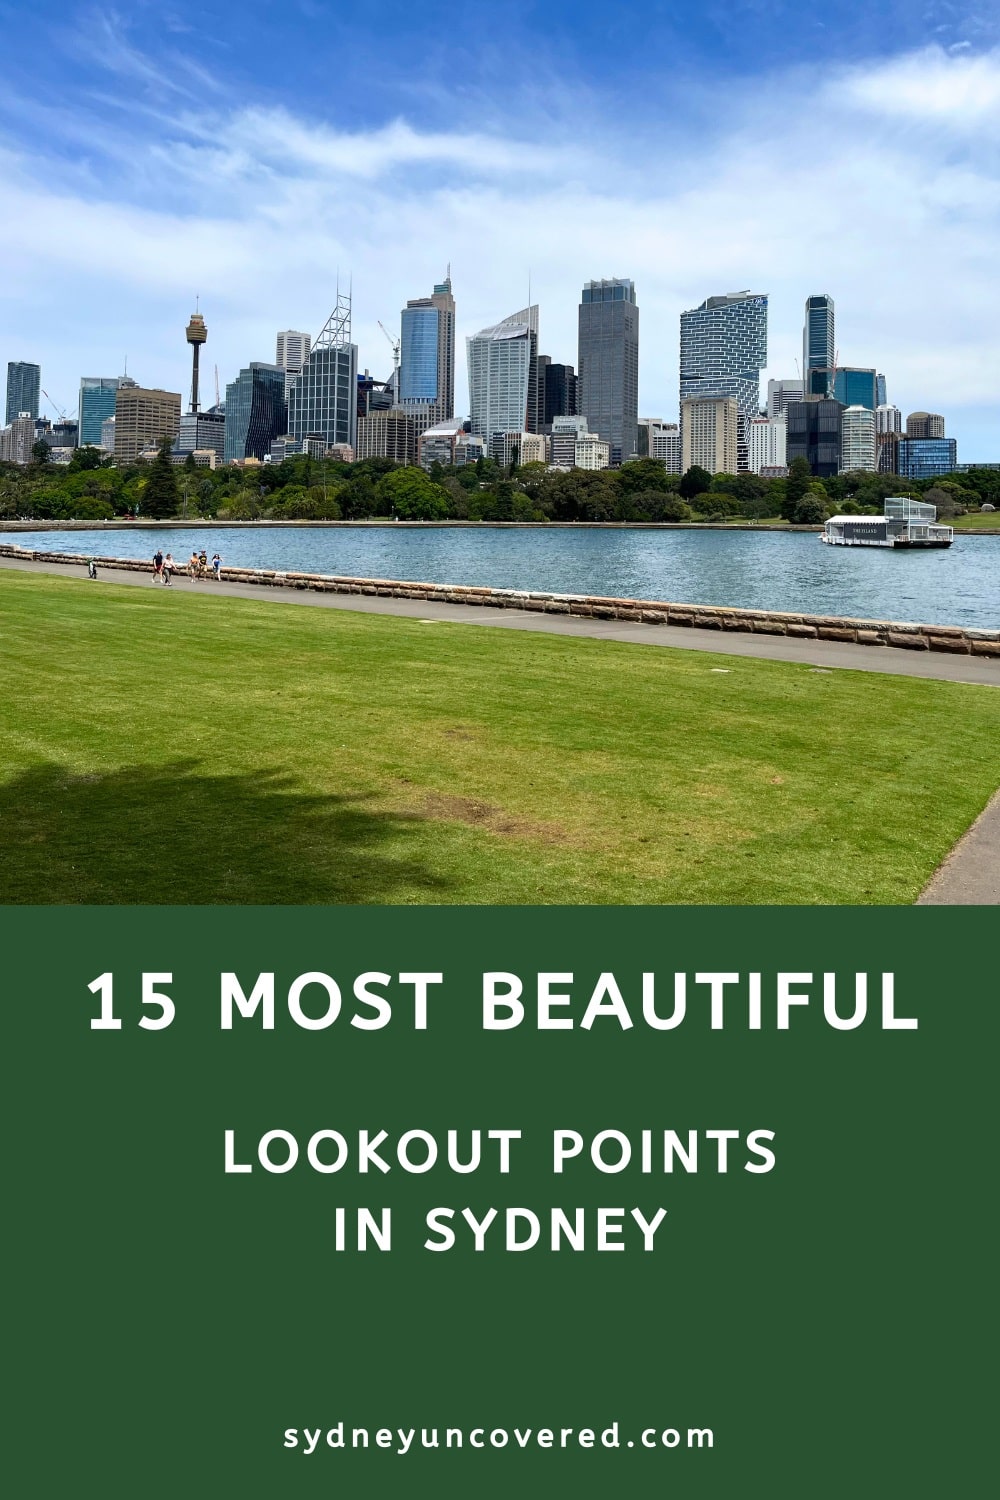 15 Most beautiful lookout points in Sydney